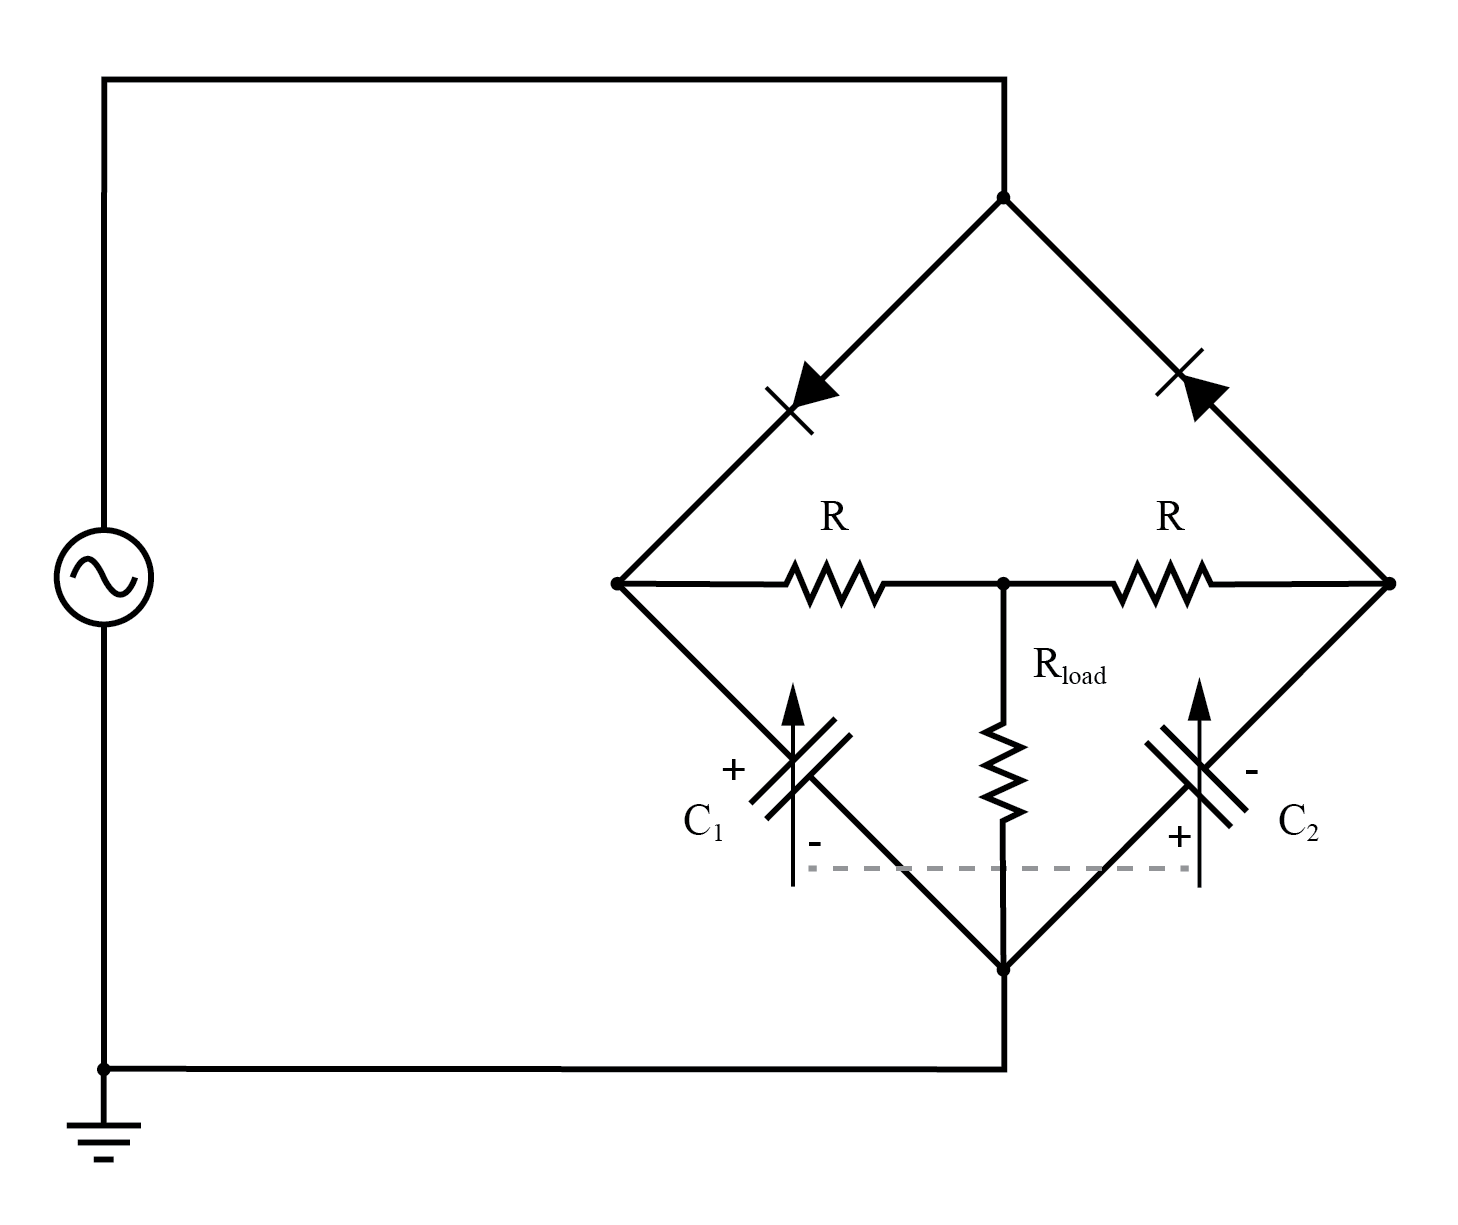 Differential capacitor transducer “Twin-T” measurement circuit redrawn as a bridge.Output is across Rload.